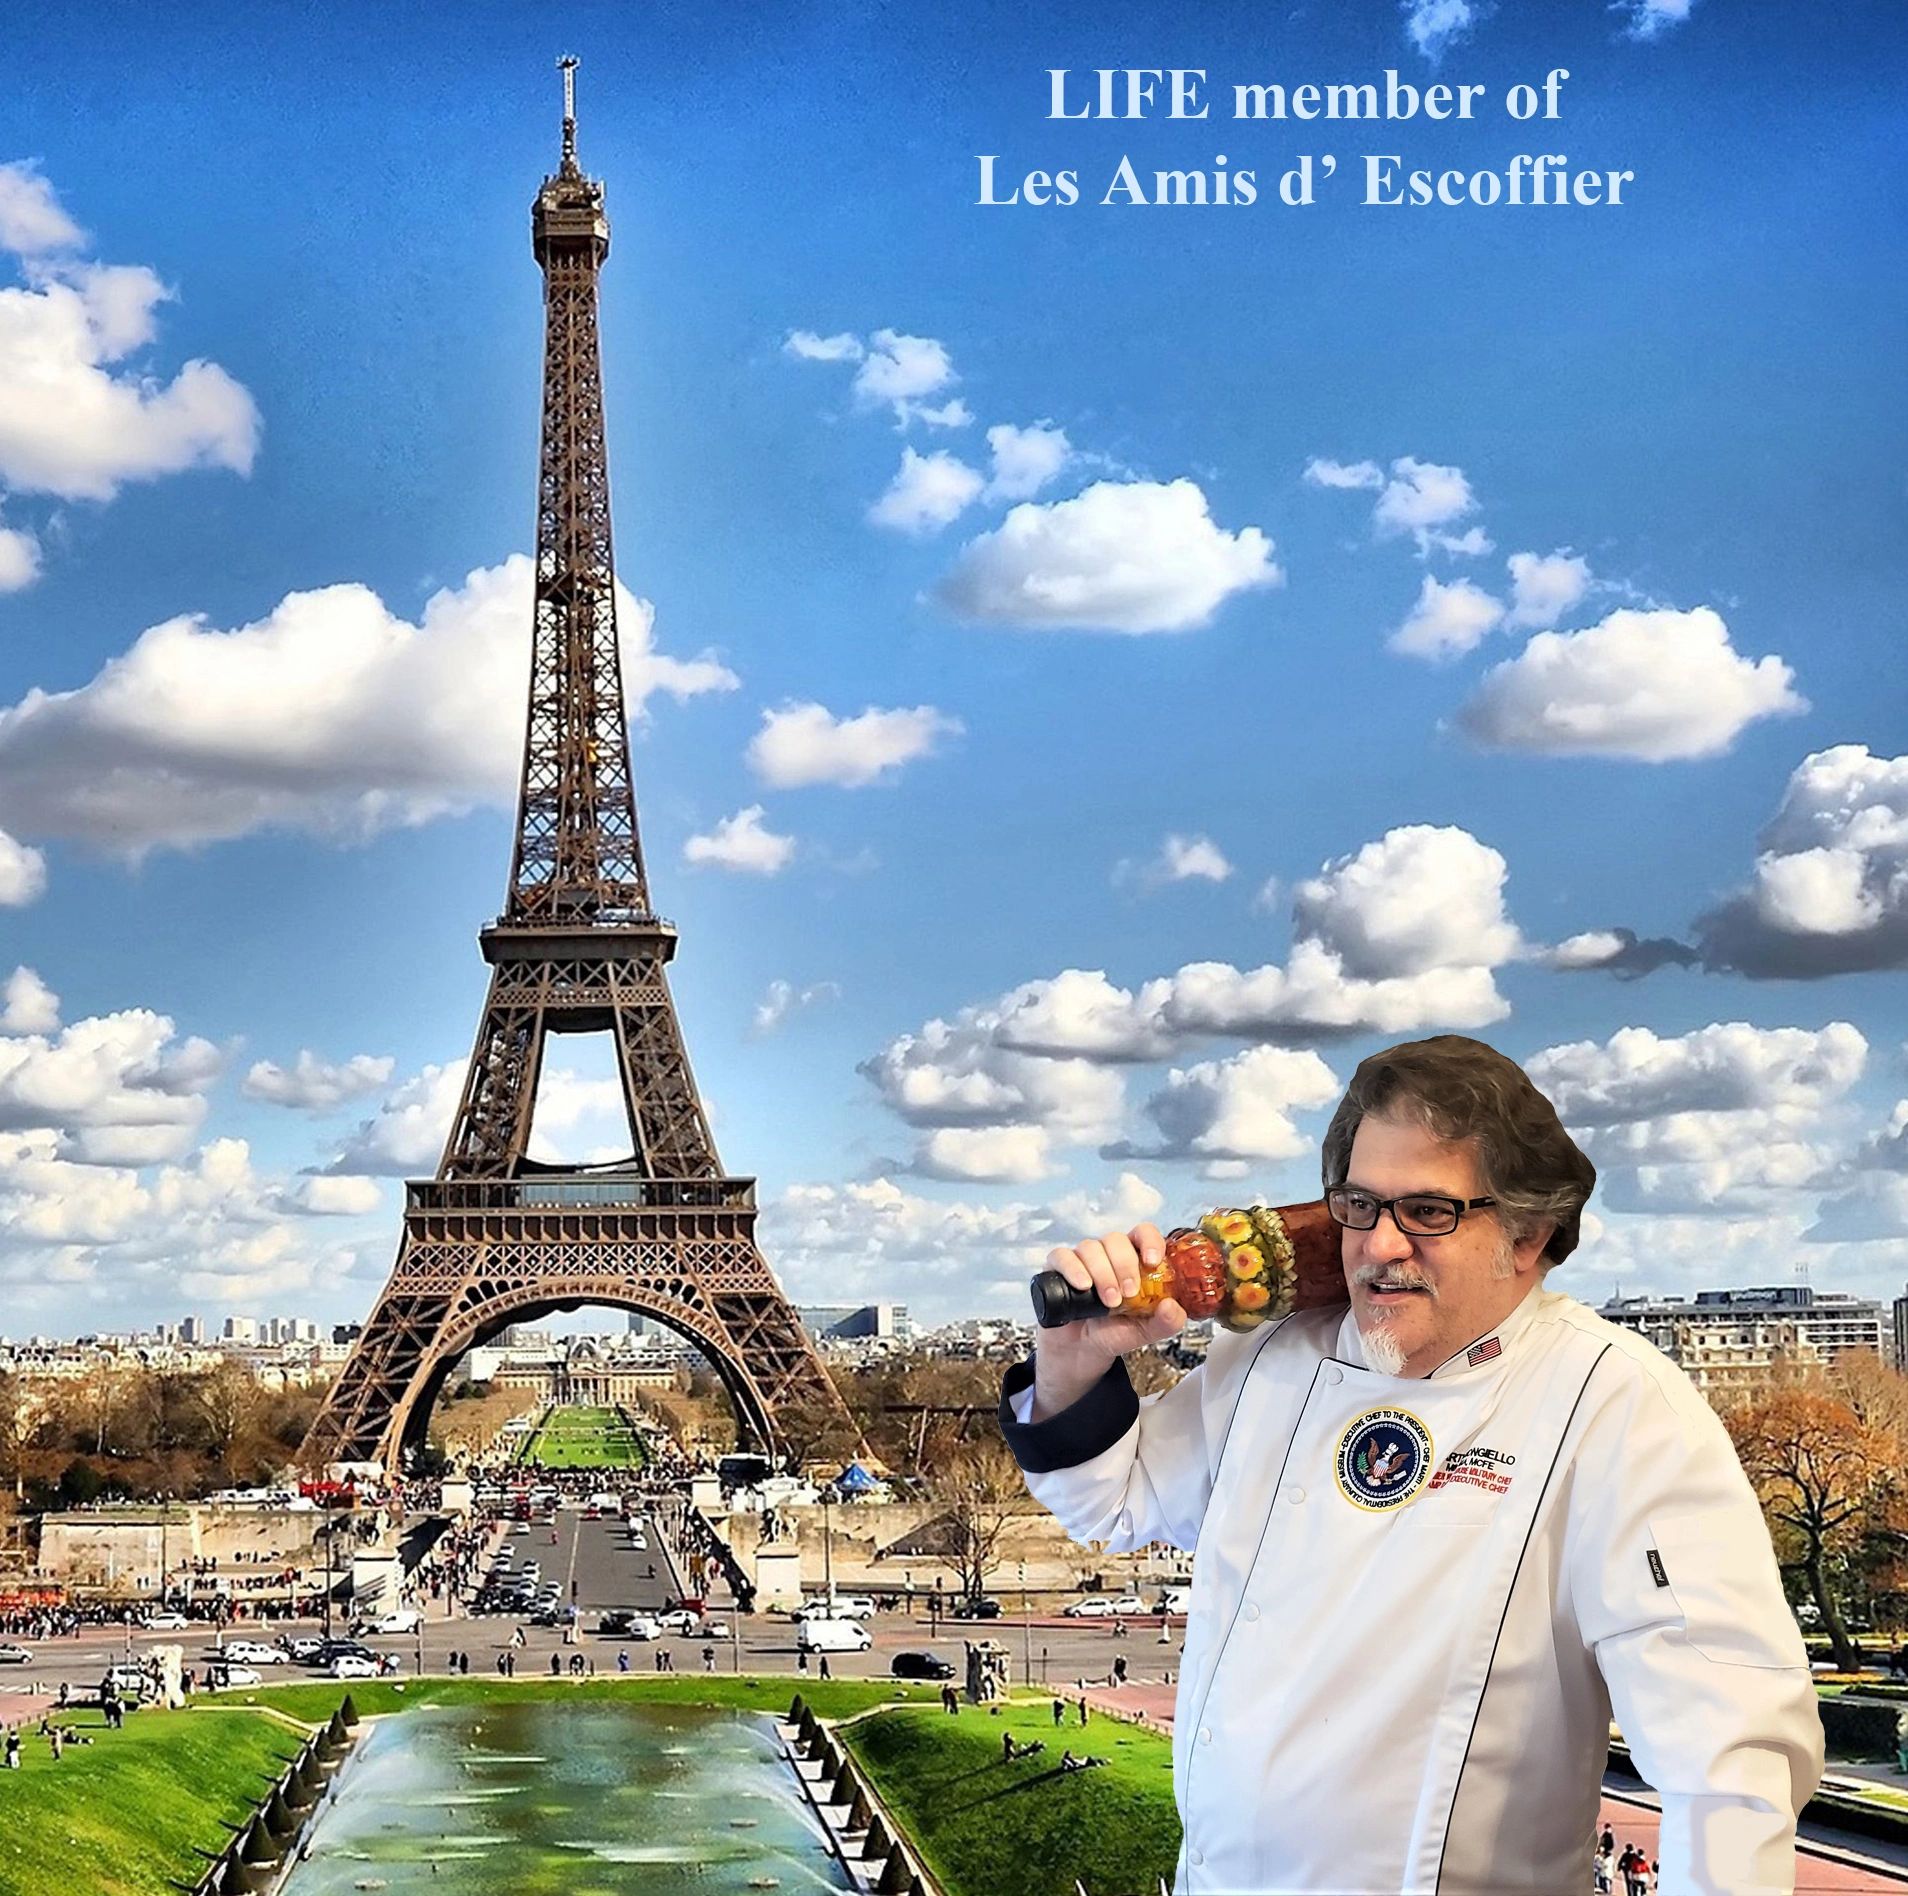 A photograph of Chef Marti Mongiello at the Eiffel Tower in Paris, France.